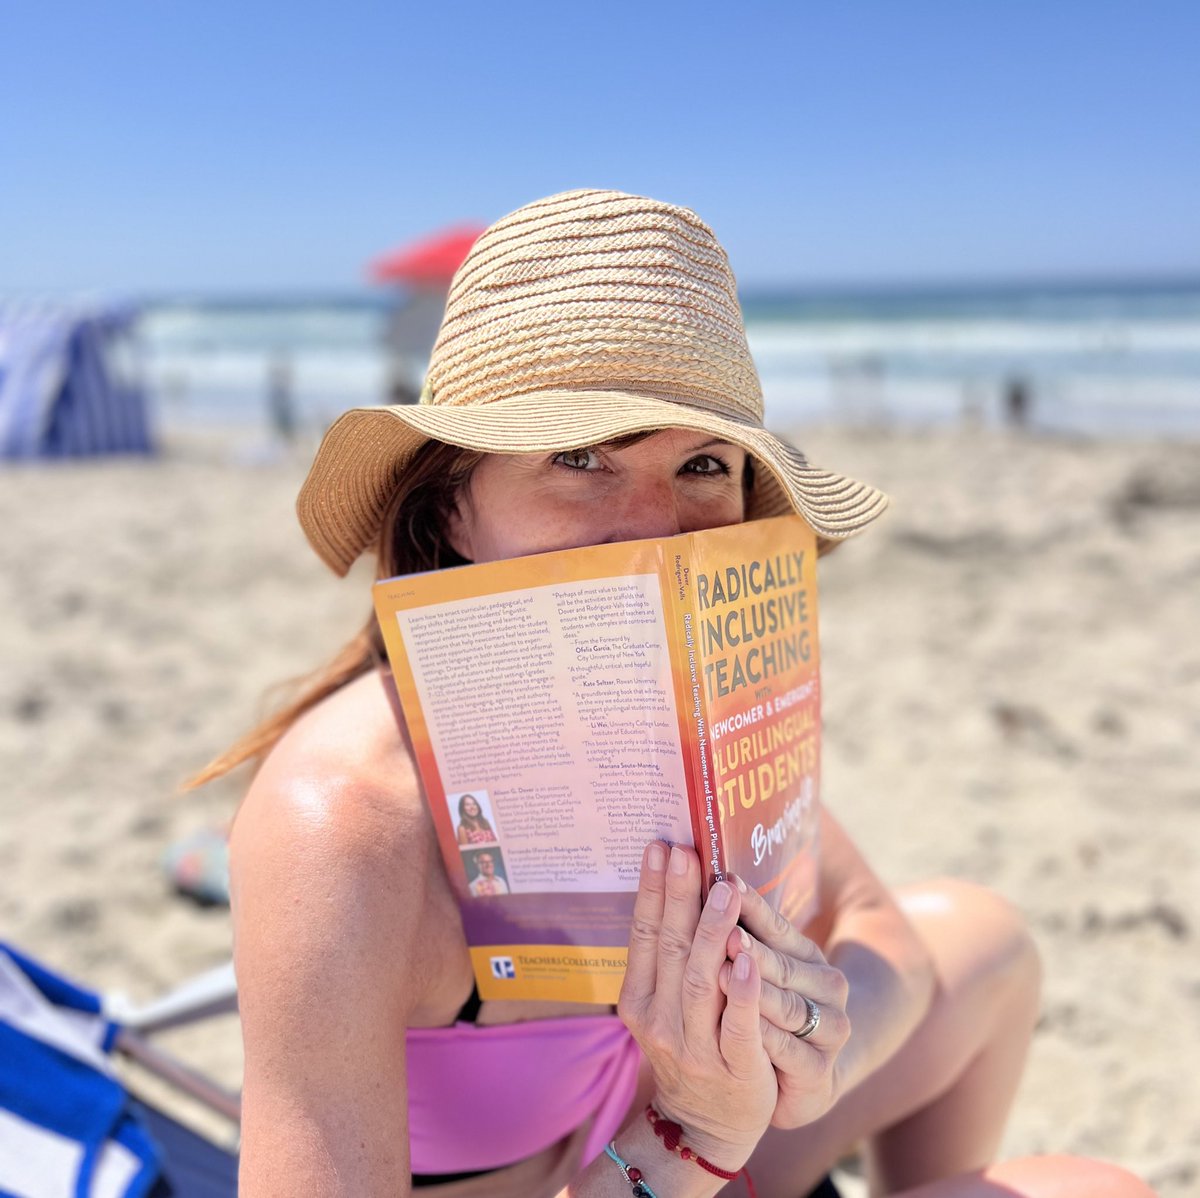 When your book is soooo good you can’t put it down ni siquiera en la playa ☺️🏖. #bravingup #newcomers & #emergent #plurilinguals #radicallyinclusiveteaching by Dr. @AlisonDover1 and Dr. Rodríguez-Valls from @csuf 
#SpringBreak and the right book just like pan y chocolate 😉